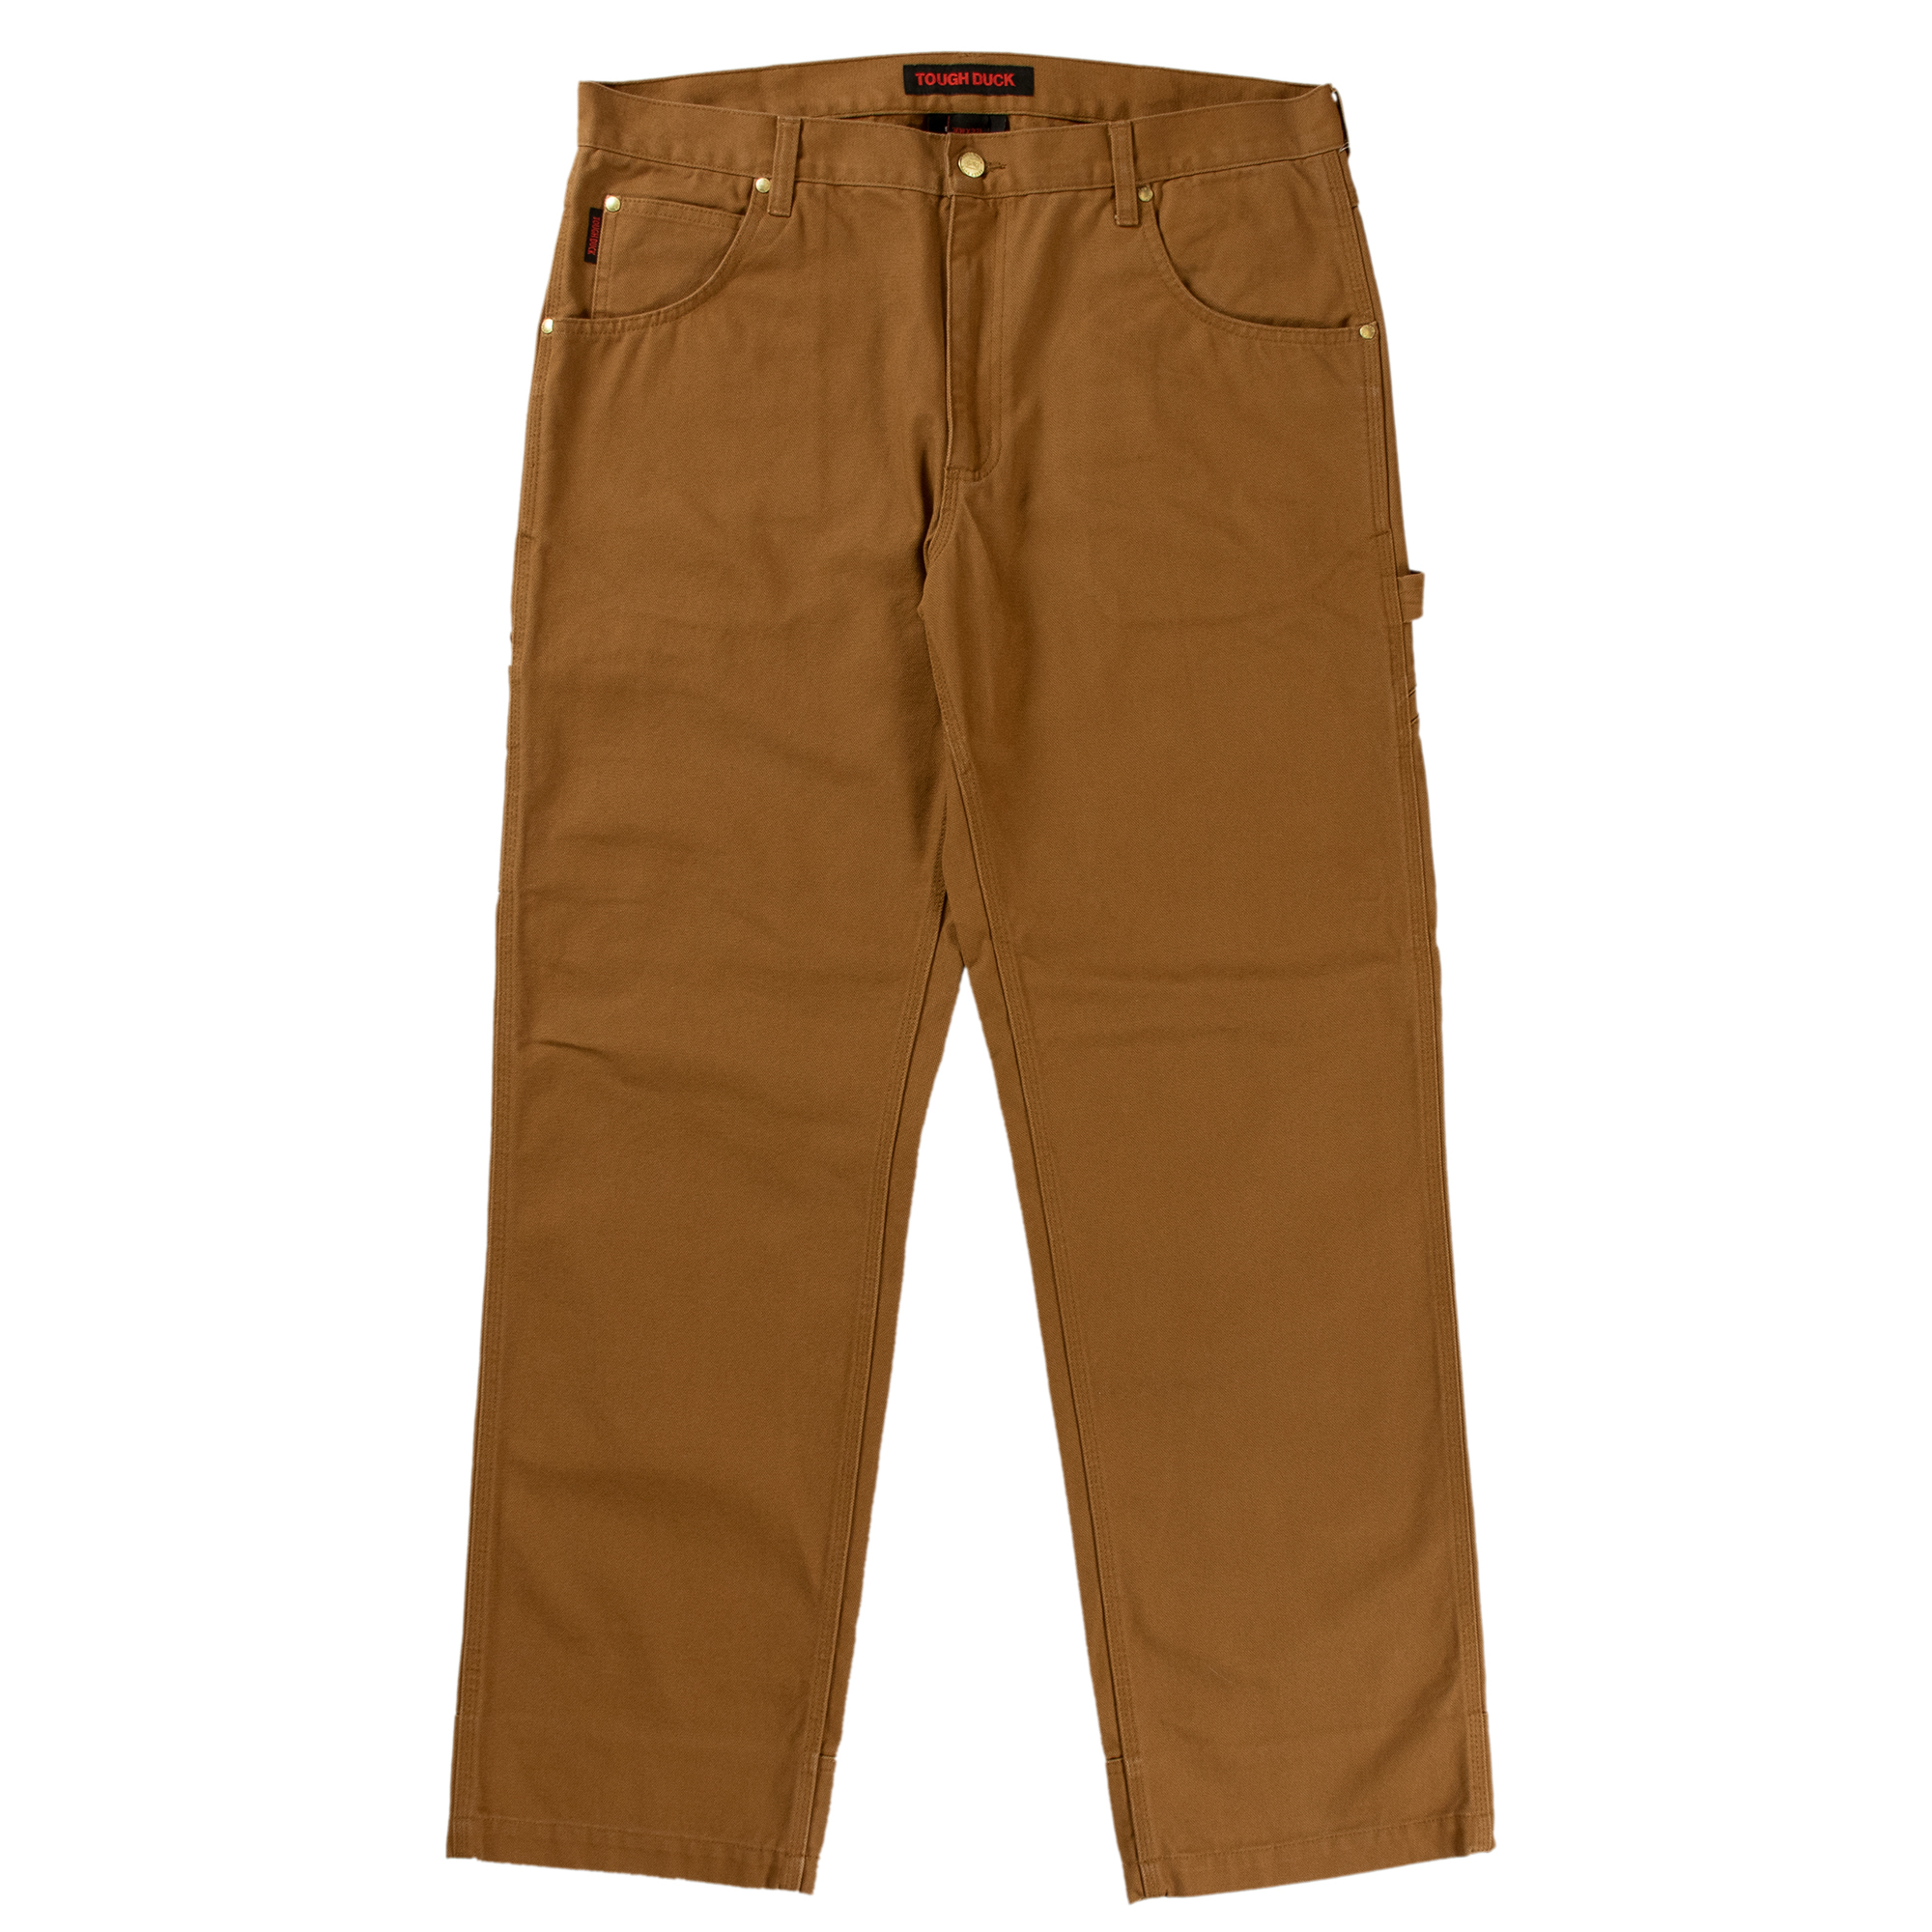 Tough Duck, Washed Duck Pant, Waist 40 in, Inseam 30 in, Color Brown, Model WP020